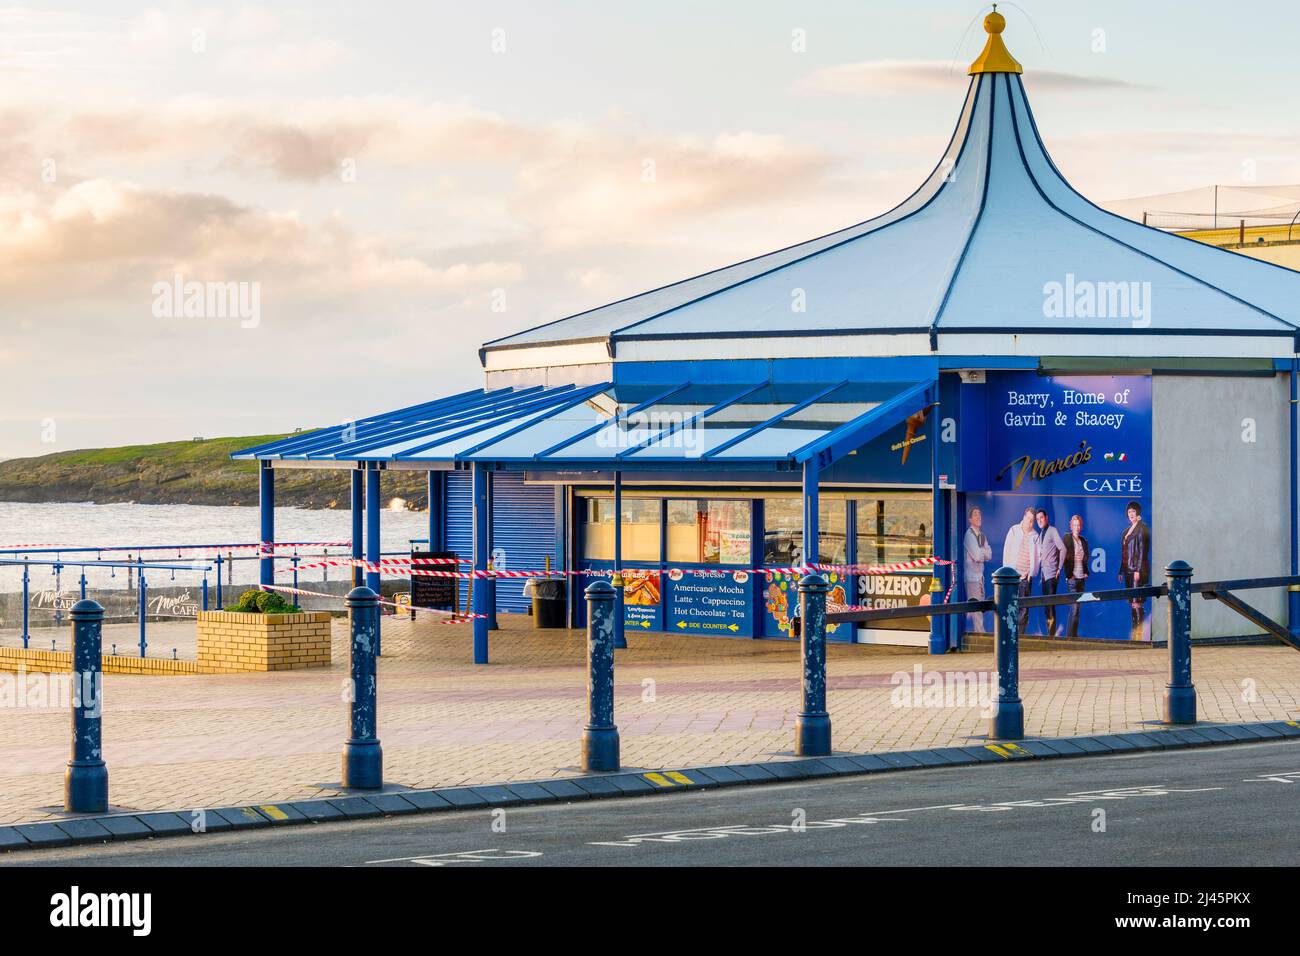 Seaside Marco's café at Barry Island, a famous Gavin & Stacey location, is closed during the Covid-19 crises on a beautiful sunny morning. Stock Photo